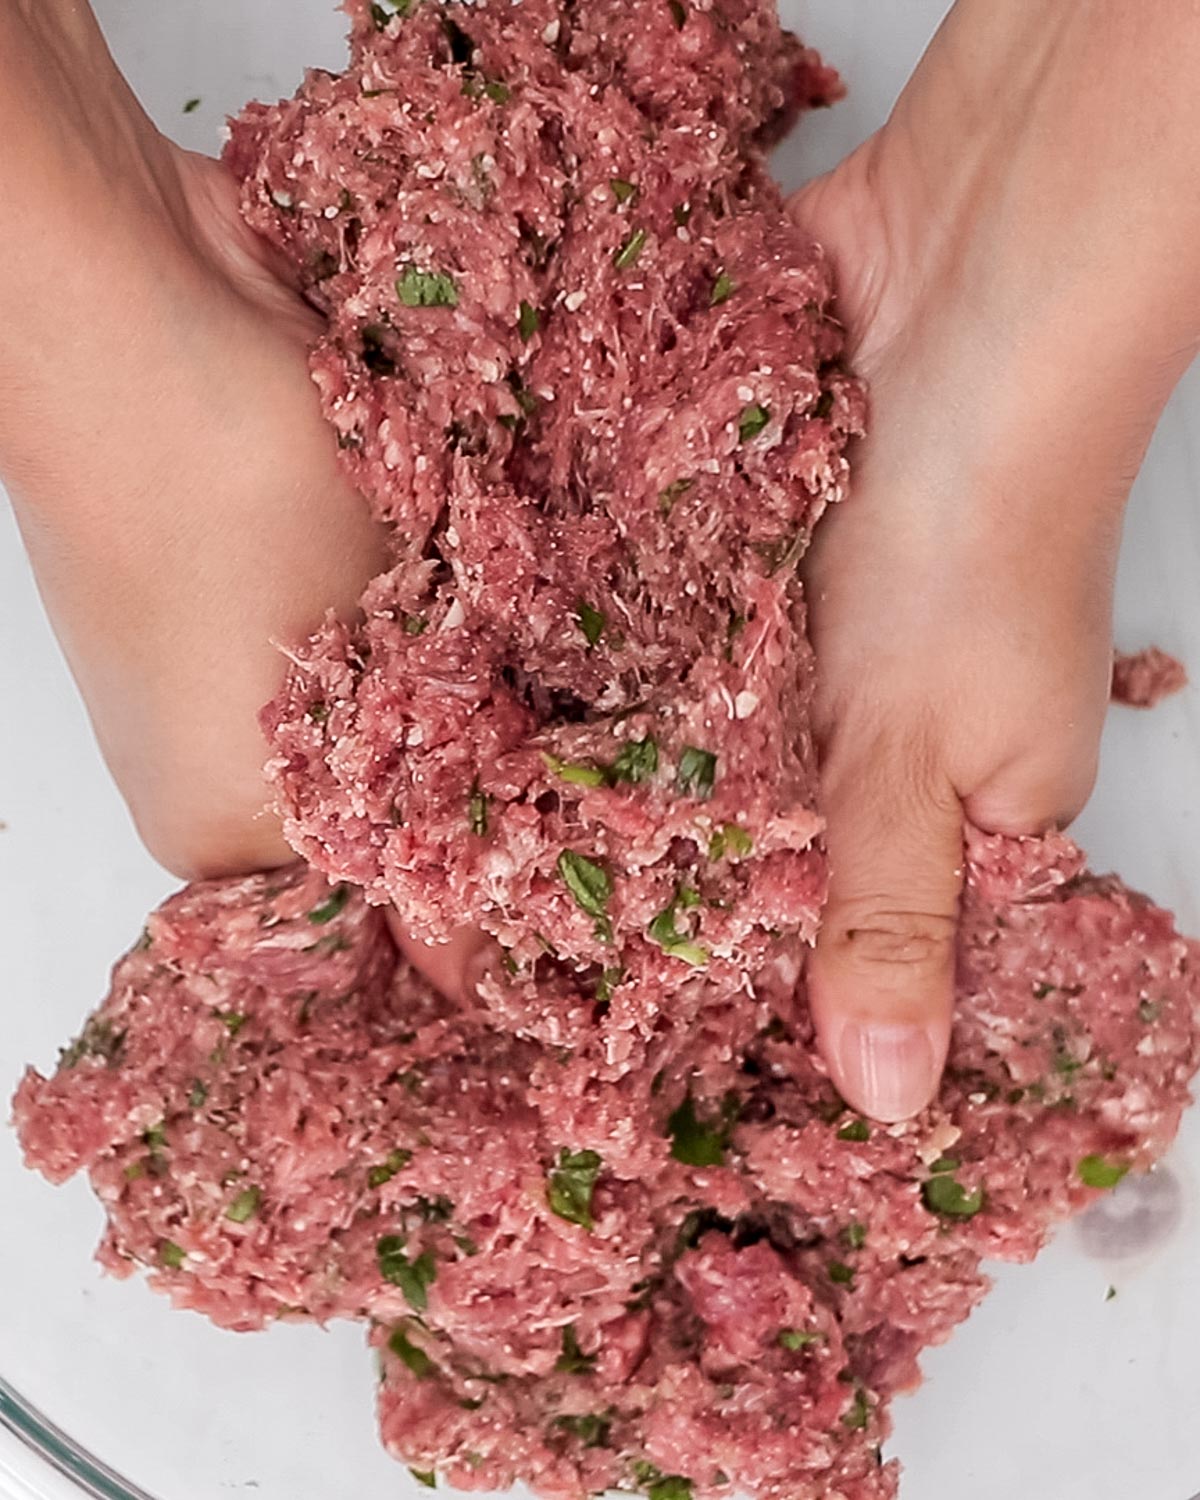 Mixing meatball ingredients by hand